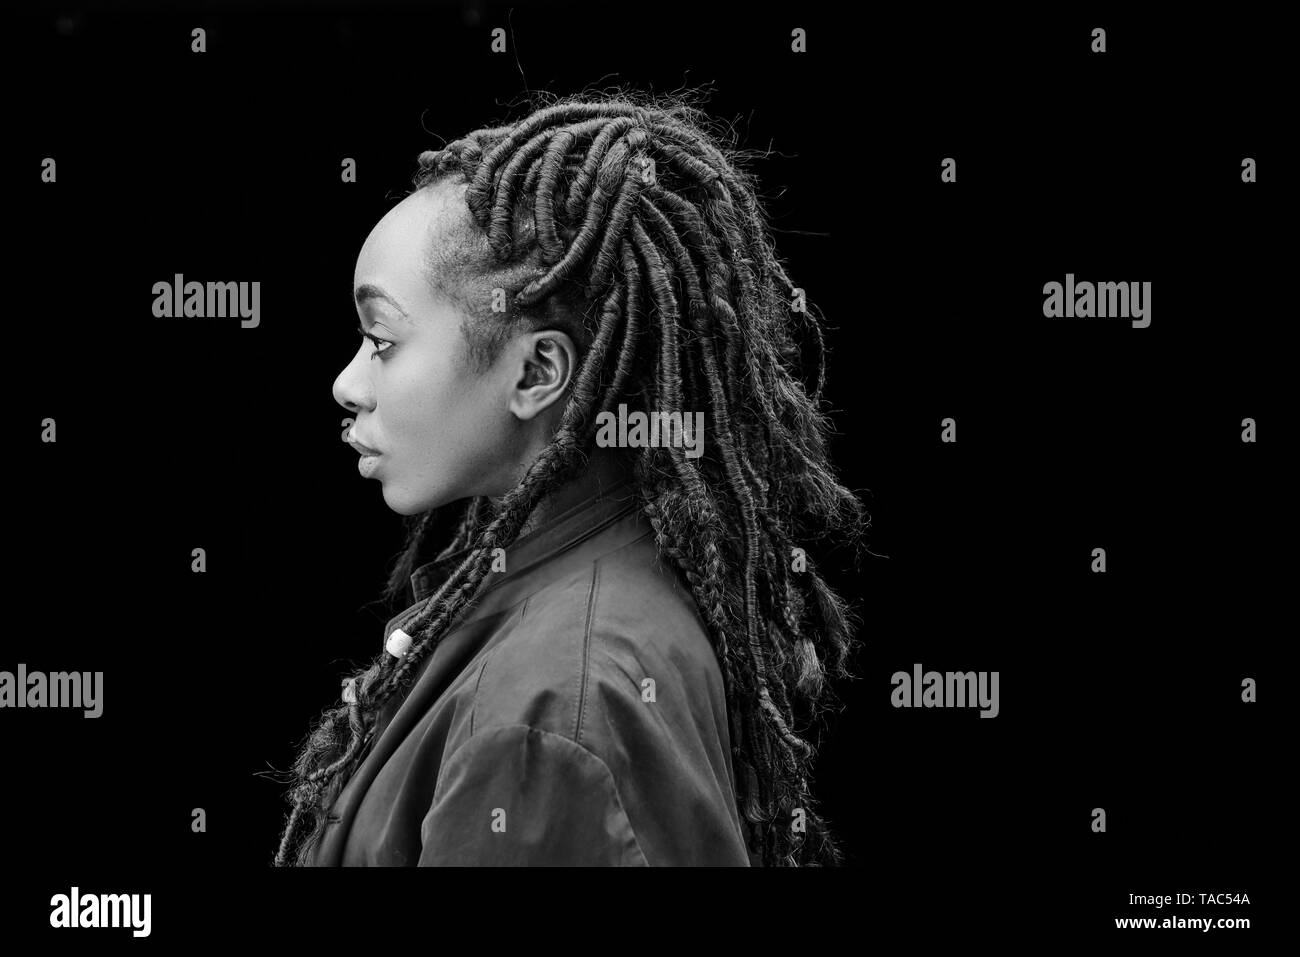 Profile of woman with dreadlocks in front of black background Stock Photo